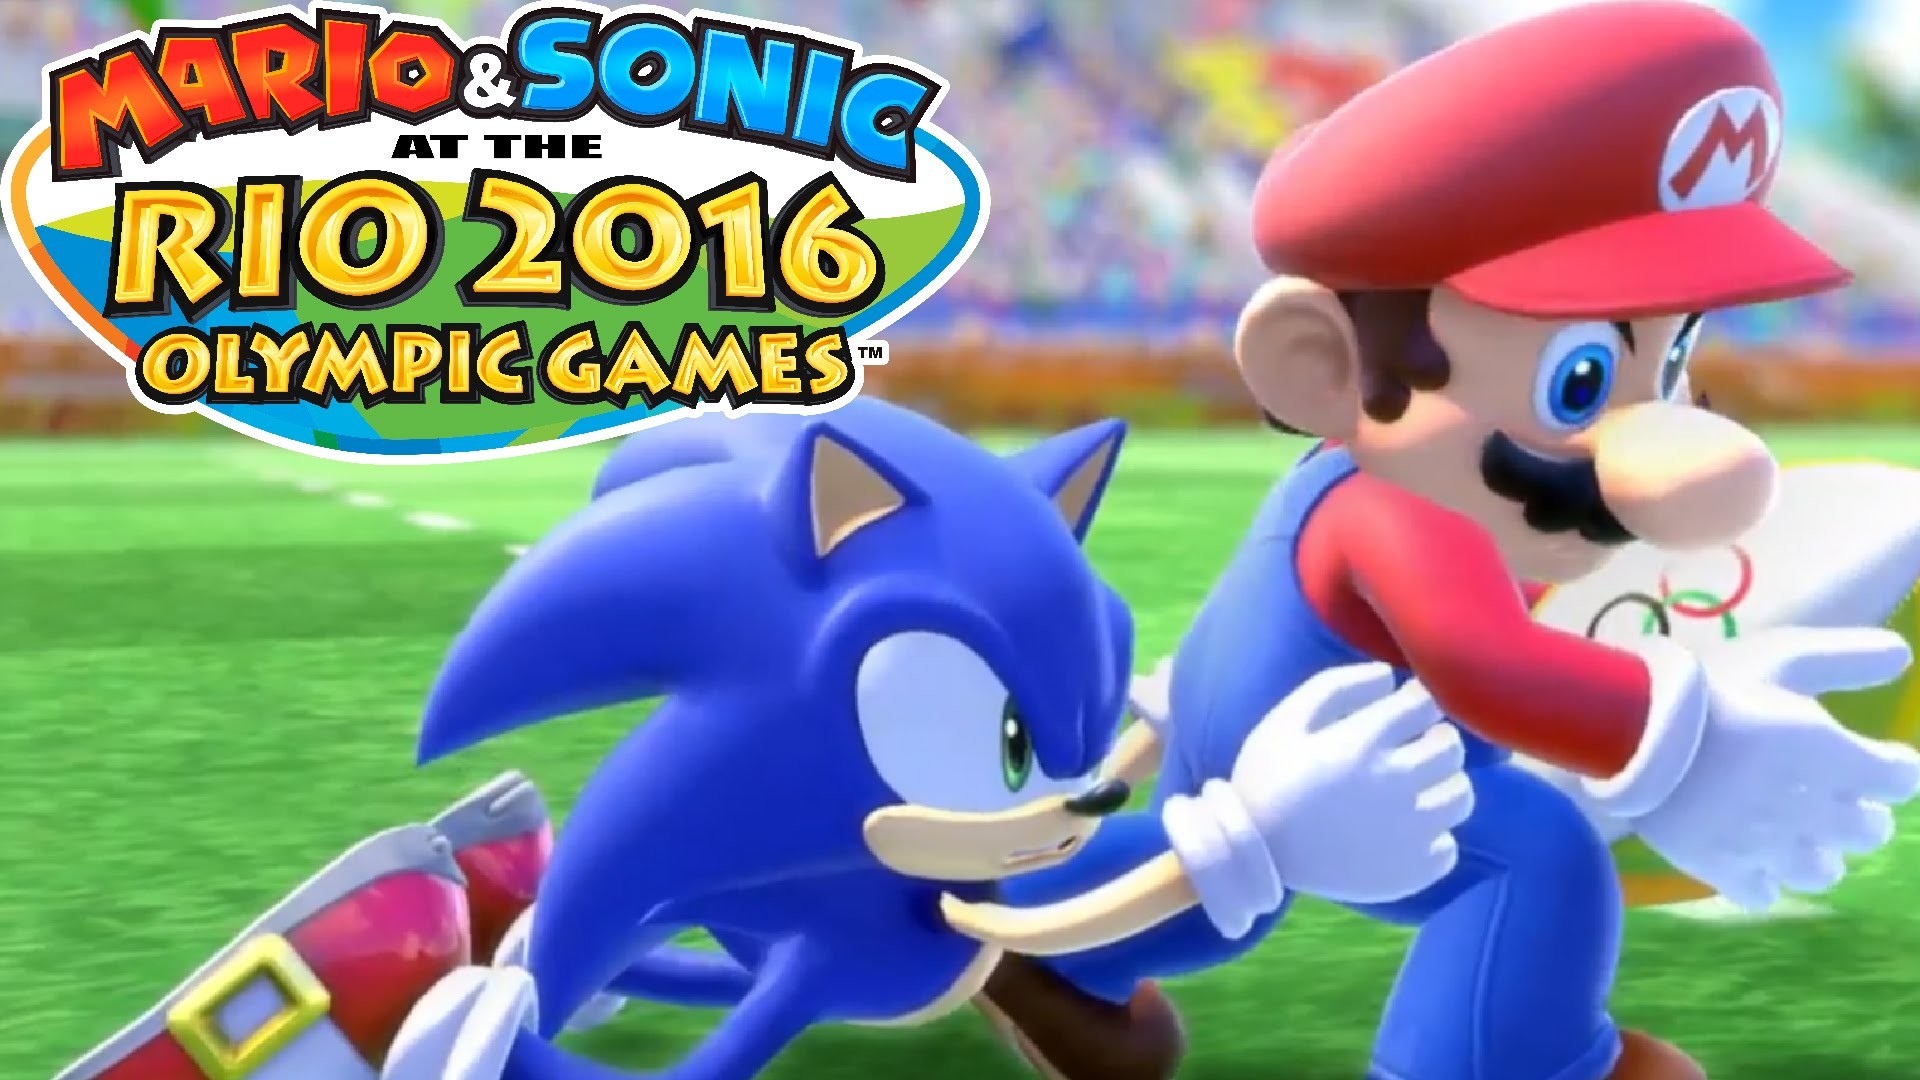 1920x1080 Mario & Sonic at the Rio 2016 Olympic Games (Wii U) - Intro HD - YouTube